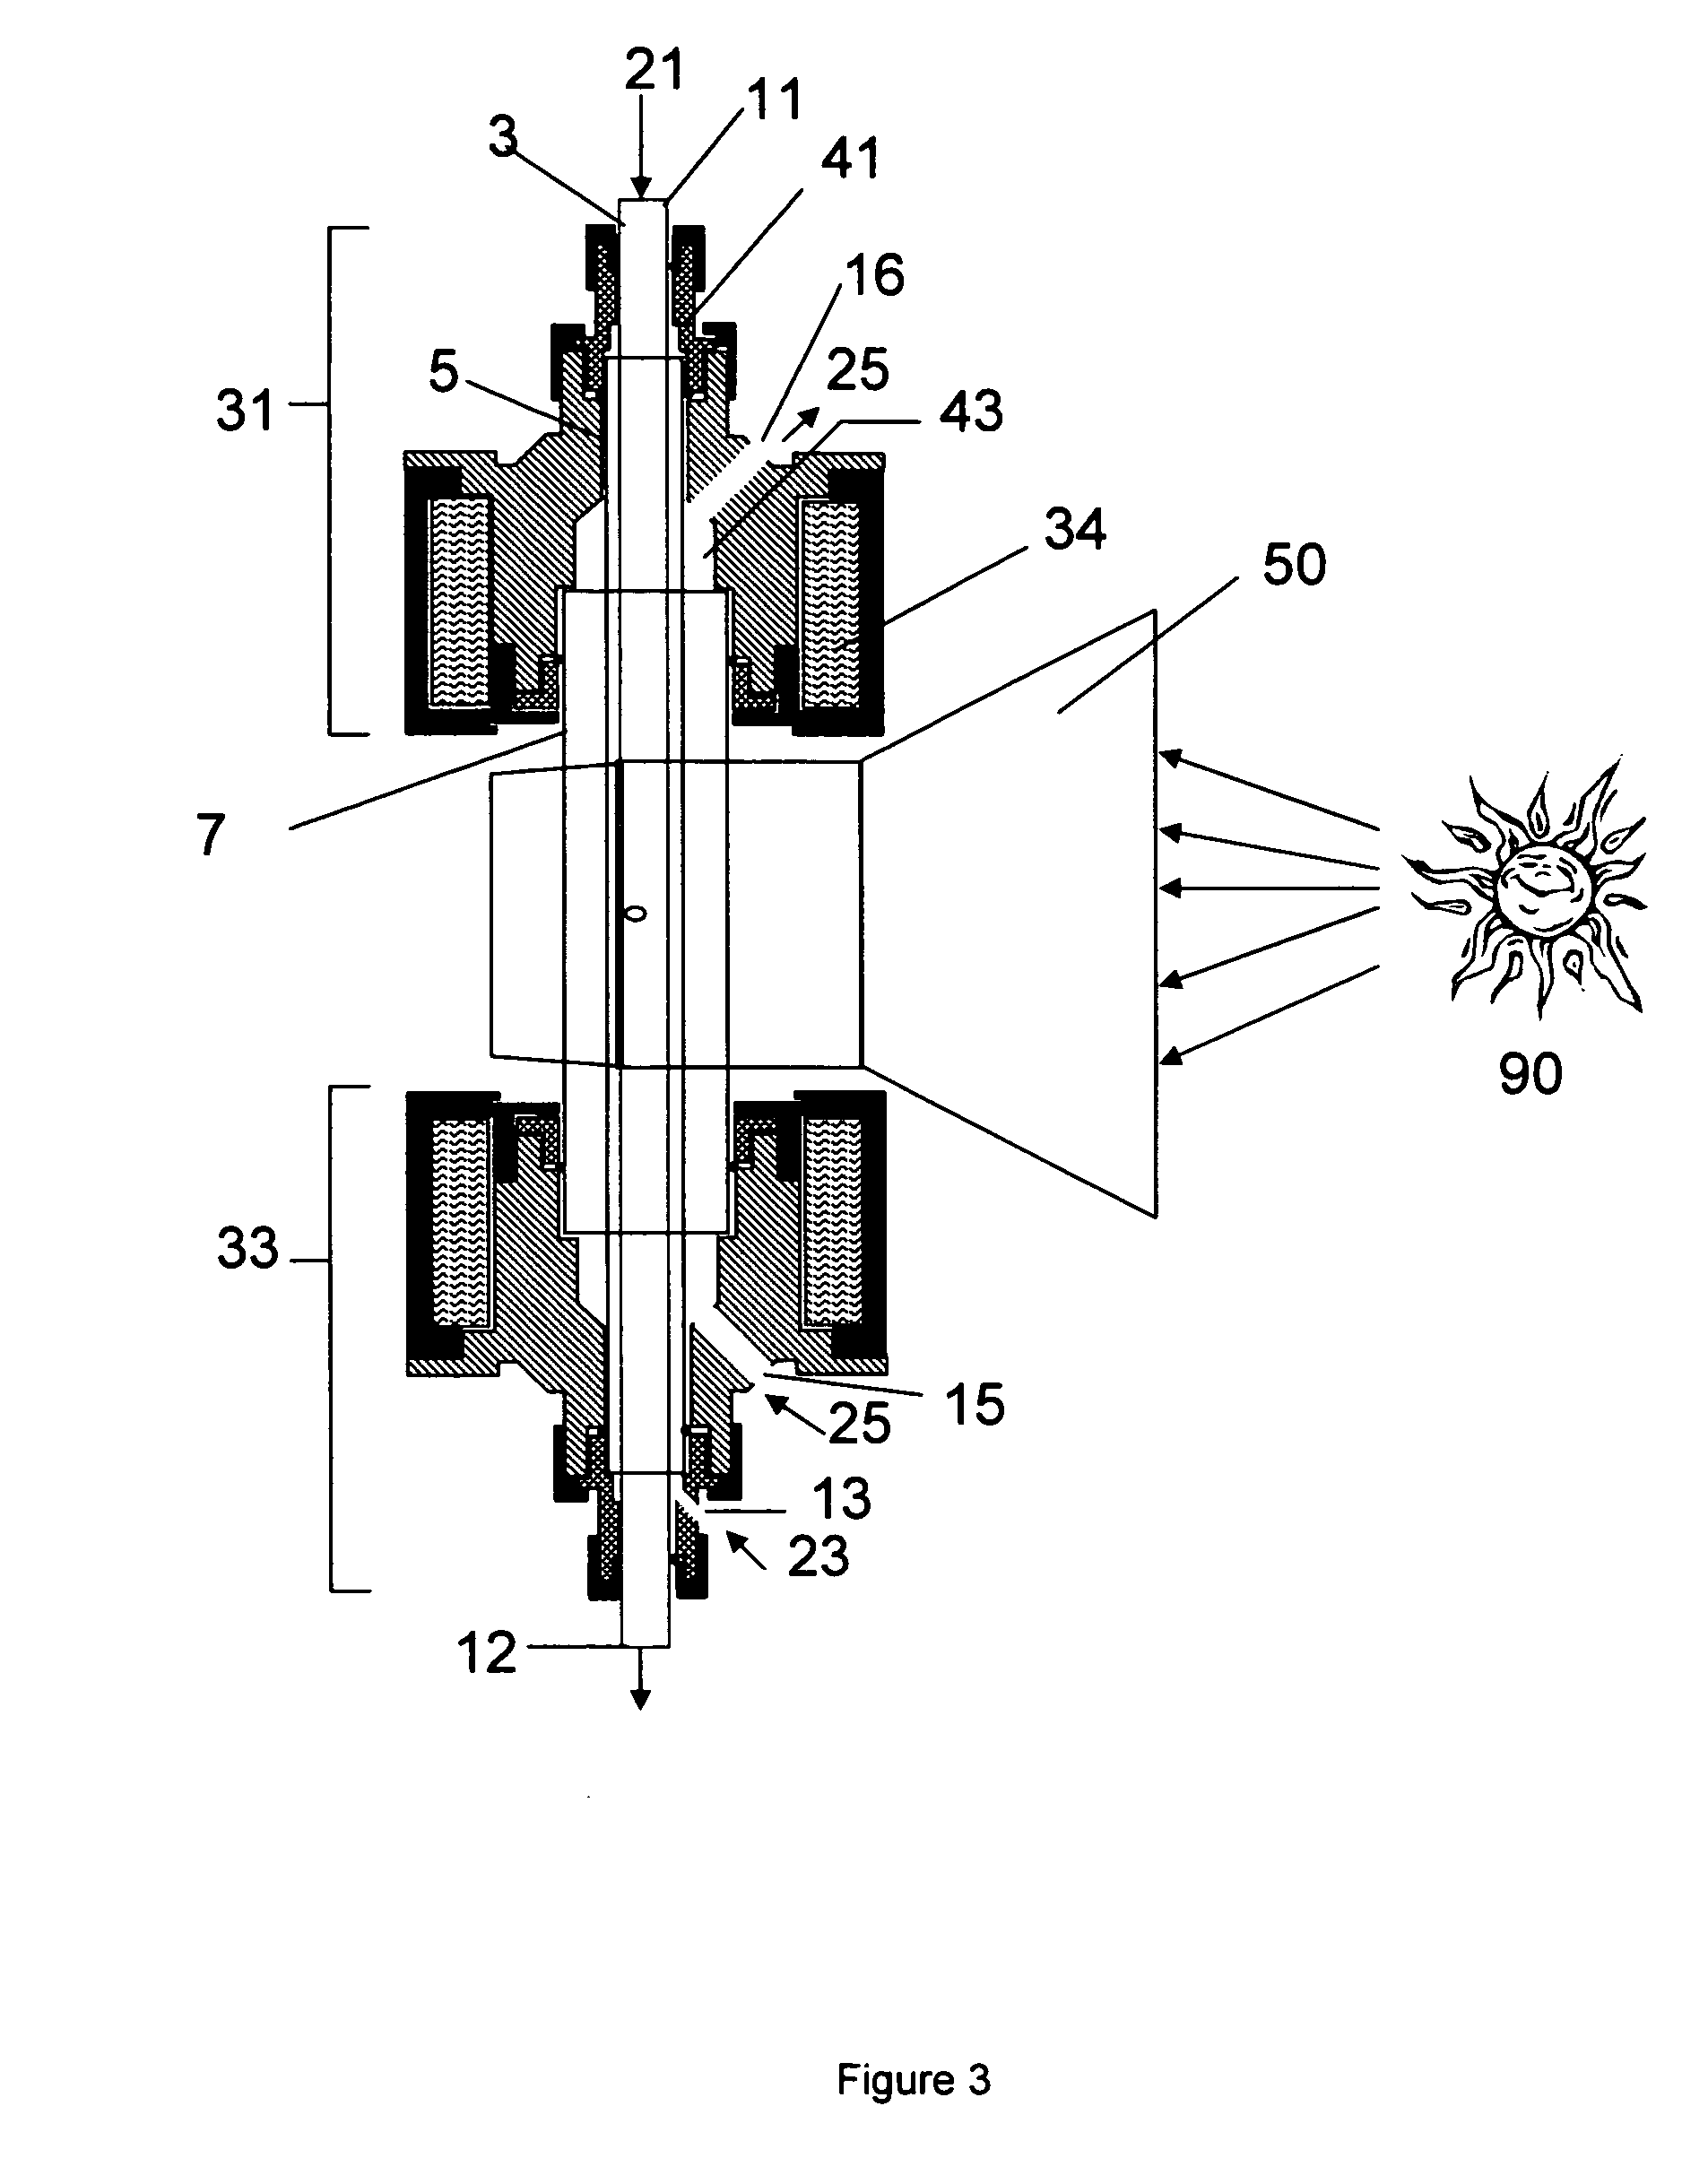 Metal-oxide based process for the generation of hydrogen from water splitting utilizing a high temperature solar aerosol flow reactor